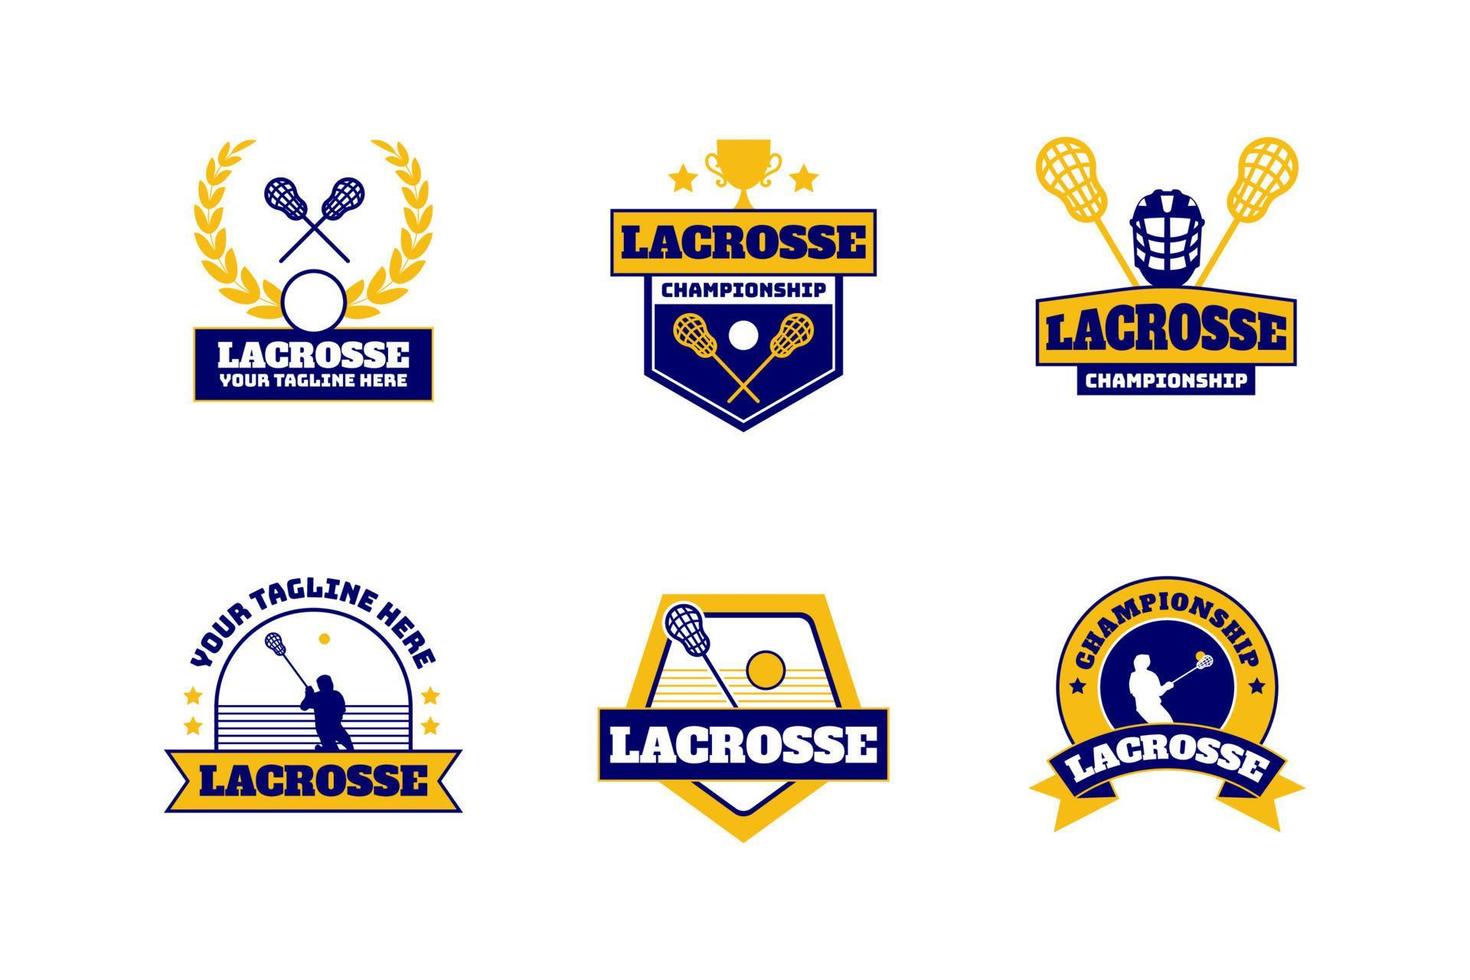 Lacrosse Championship Badge Logo in Yellow and Blue vector